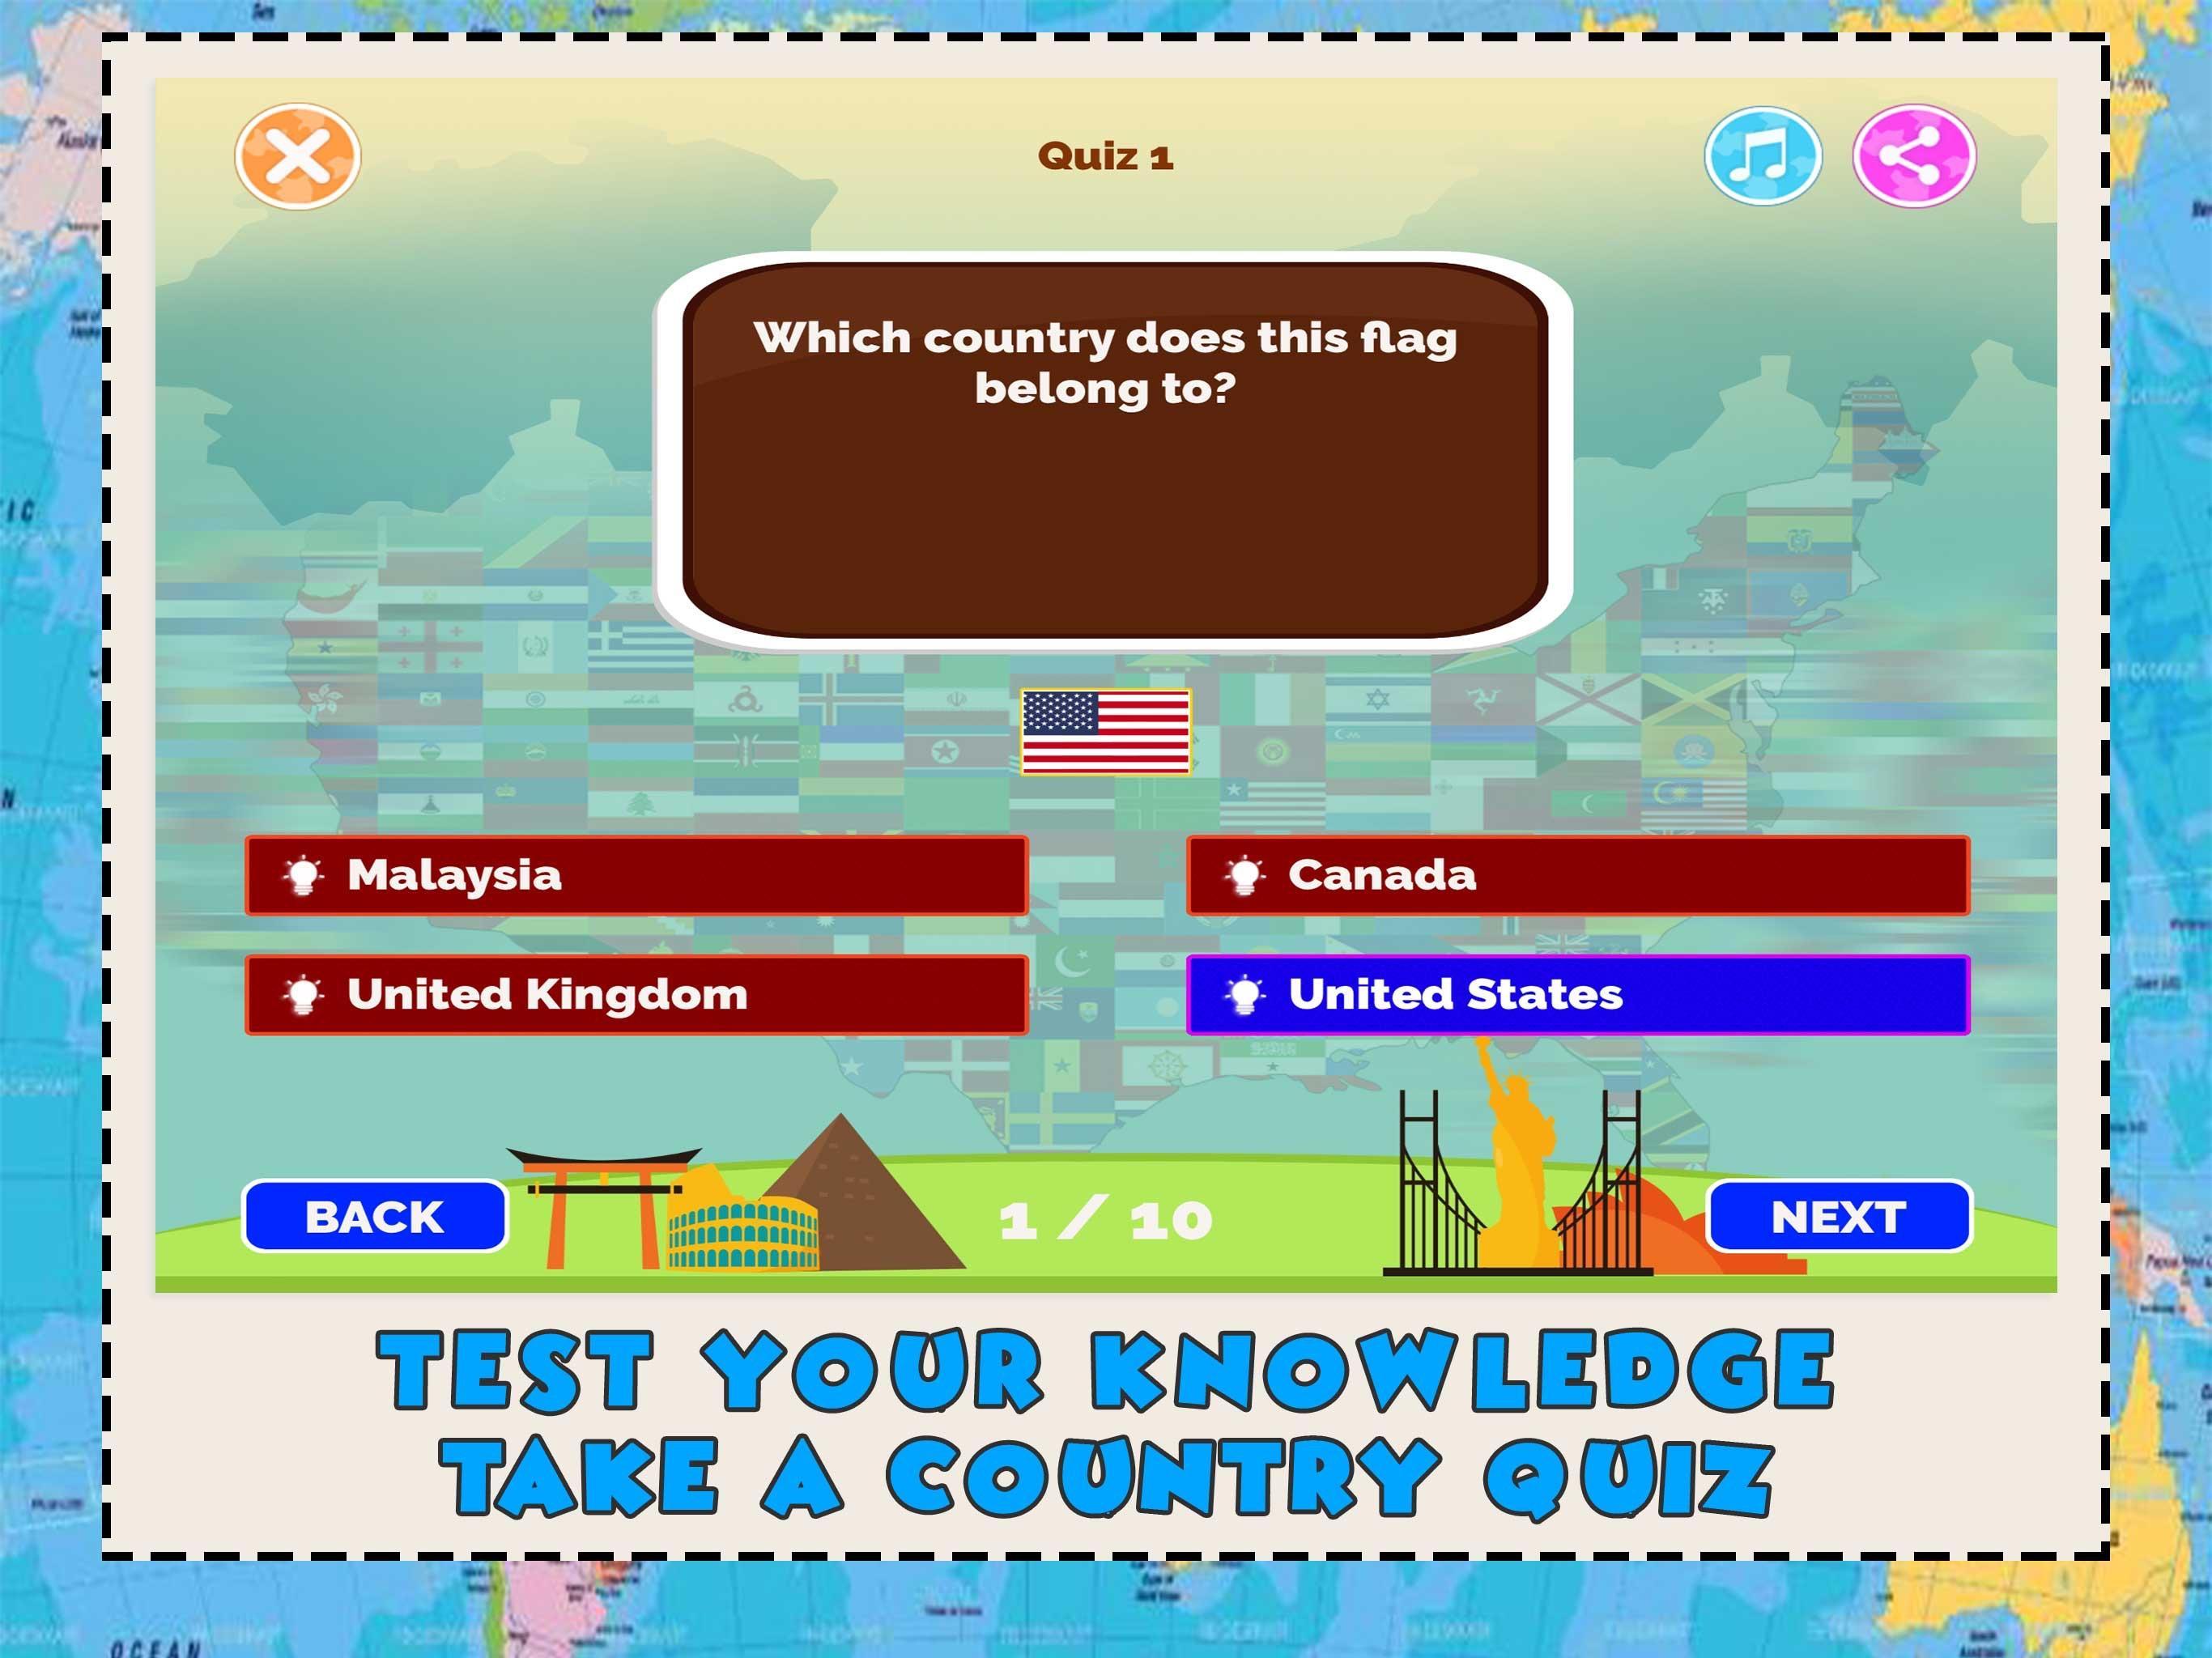 World Geography Games For Kids - Learn Countries 2.5 Screenshot 3